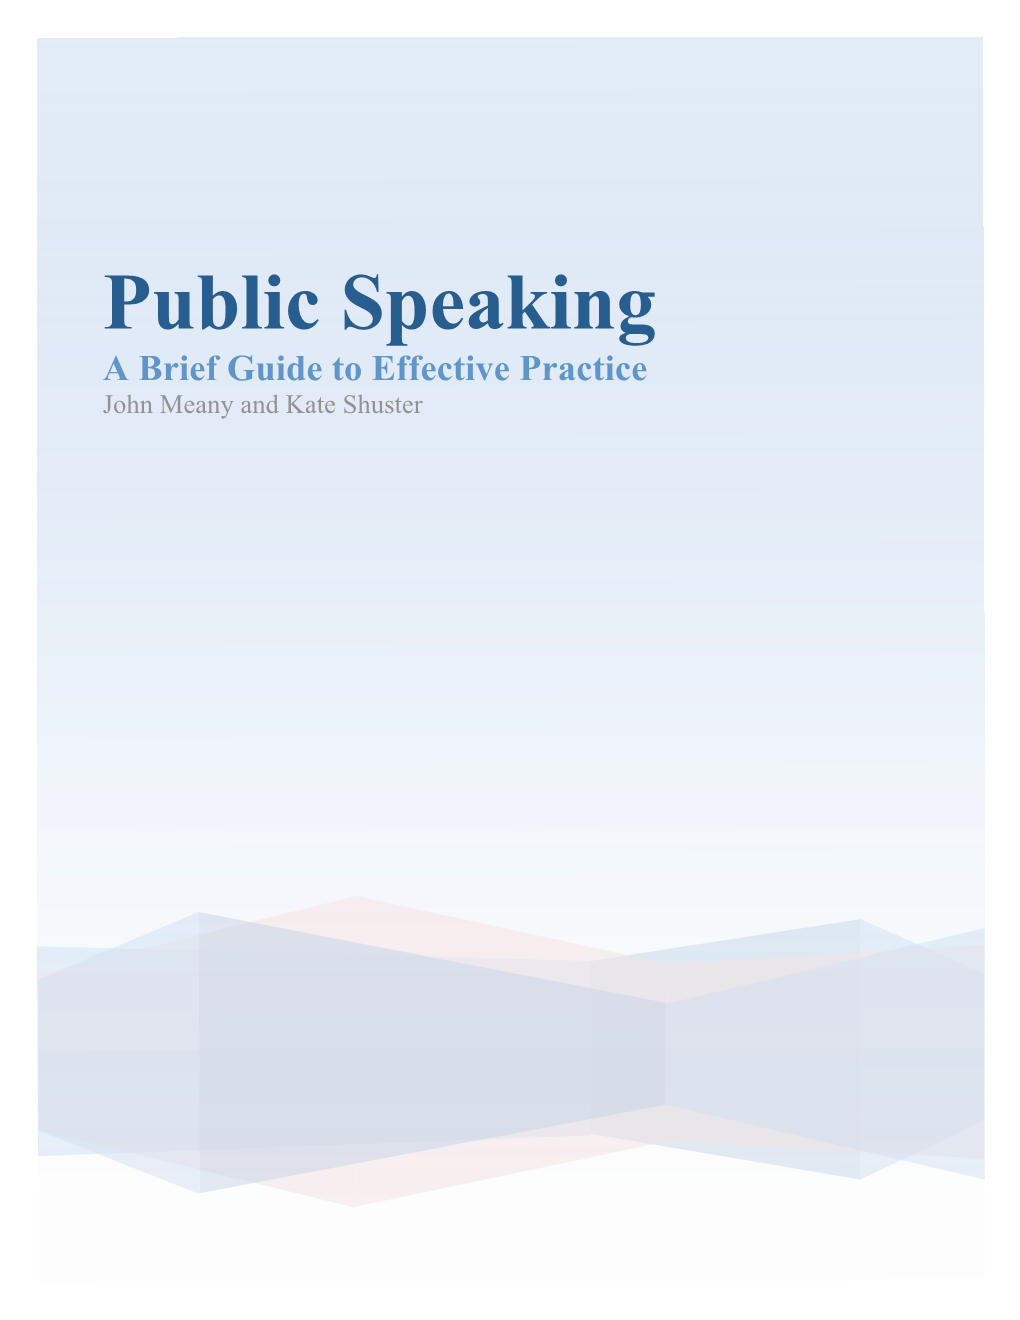 Public Speaking a Brief Guide to Effective Practice John Meany and Kate Shuster